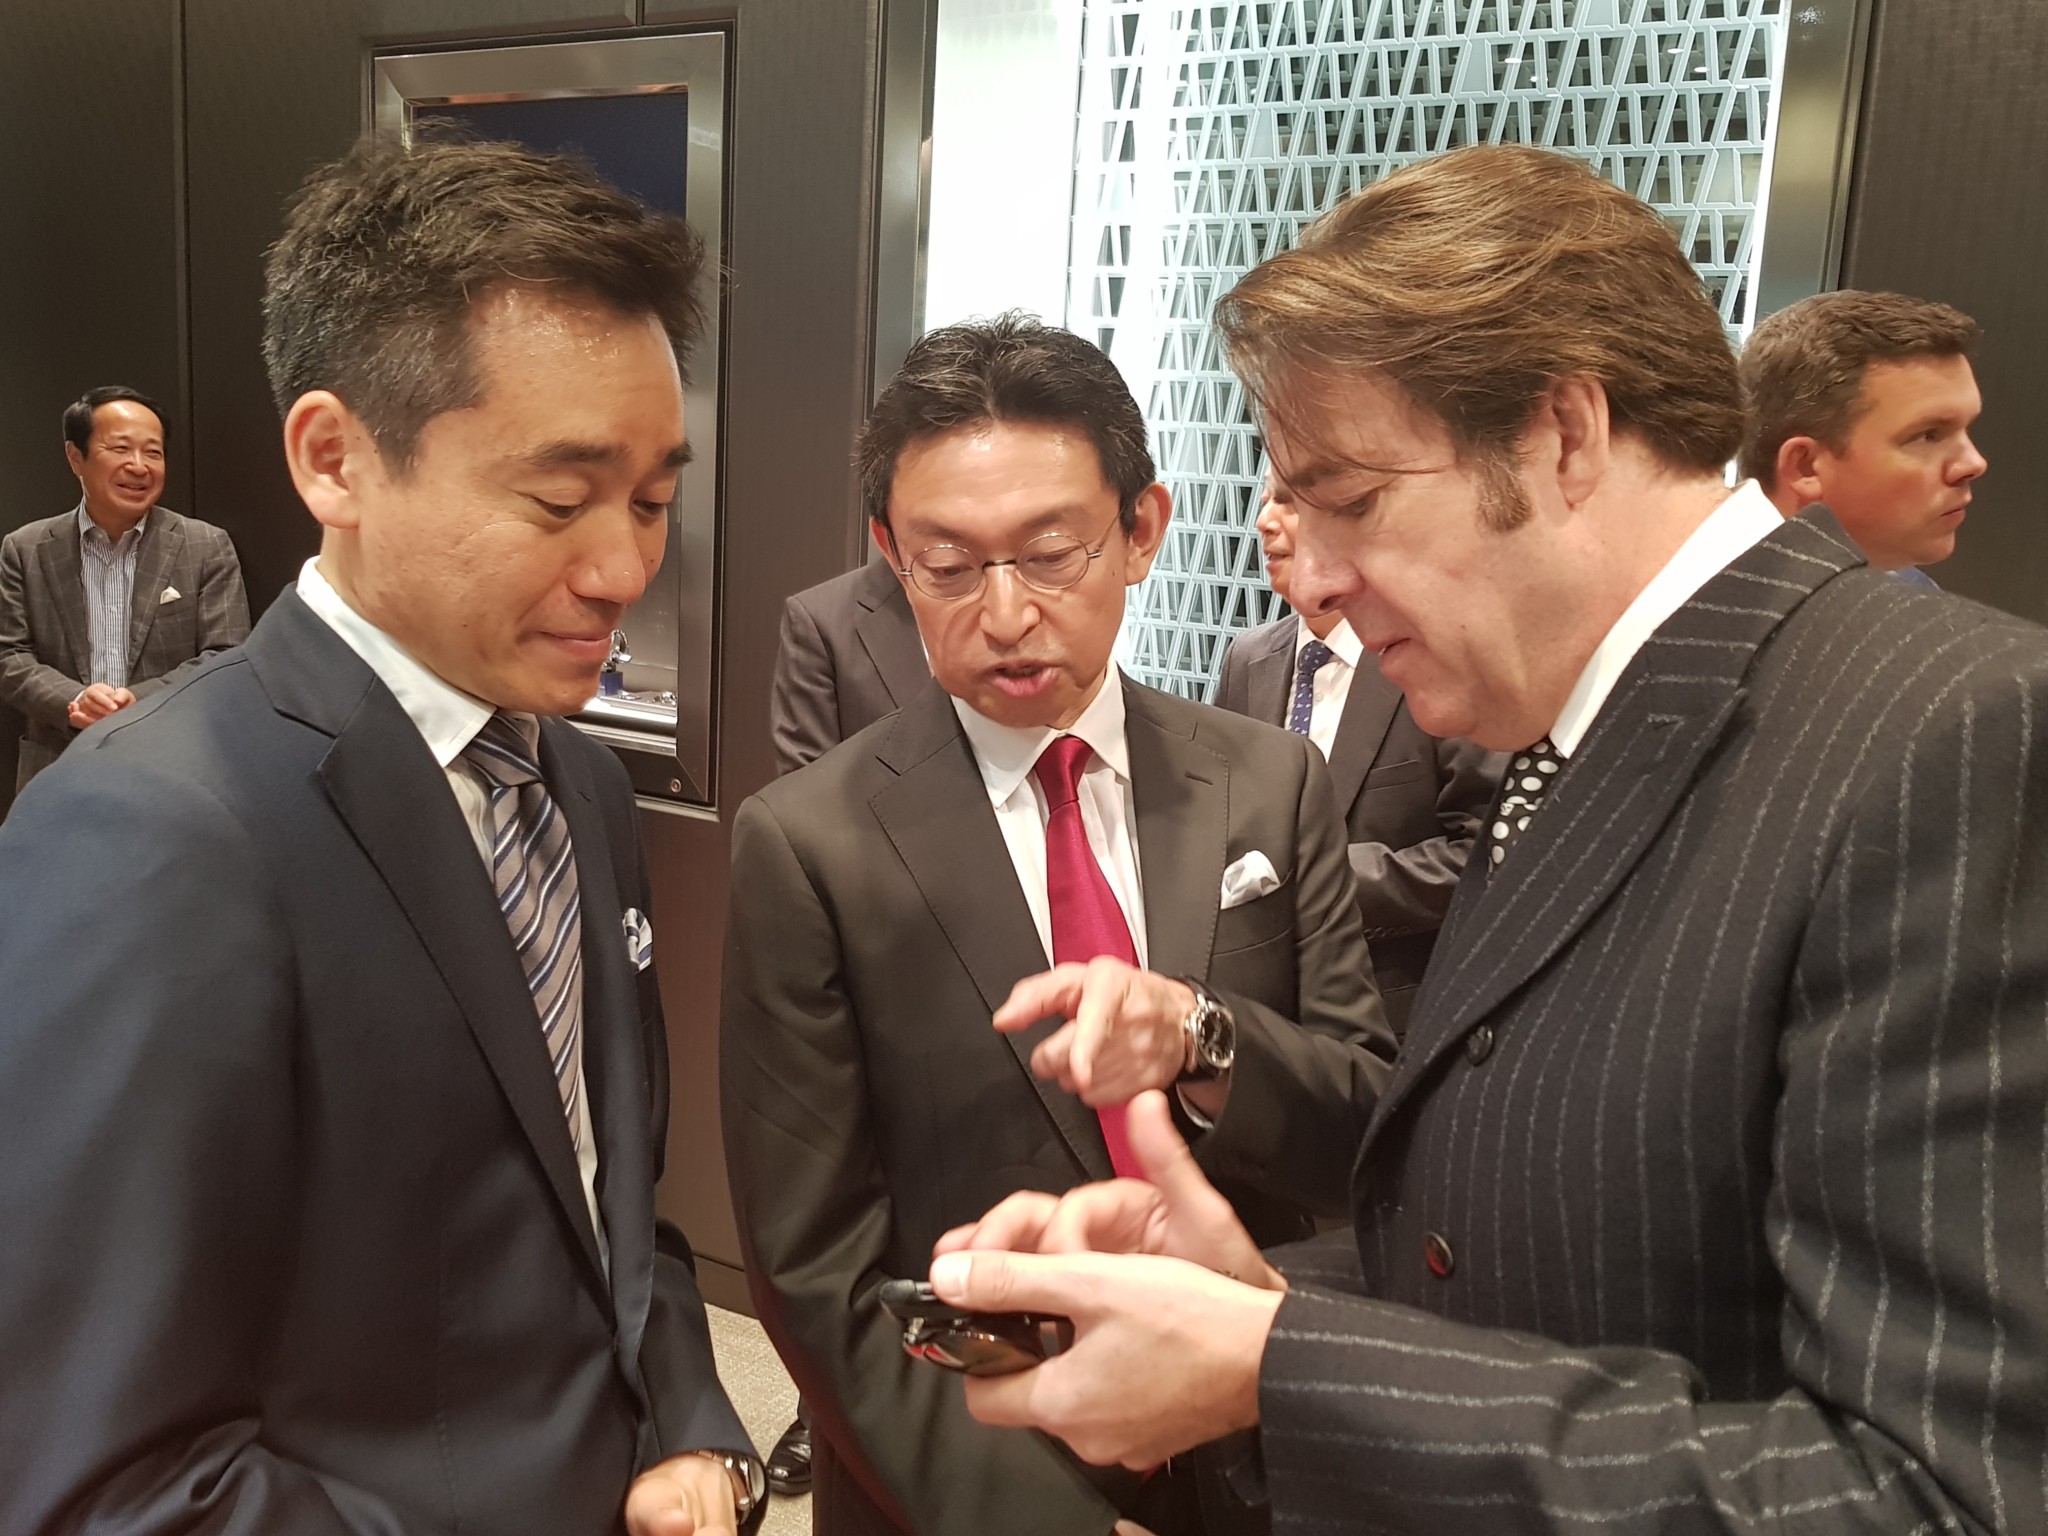 Kinya iwami left) discuses japanese culture with tv personality jonathan ross right).